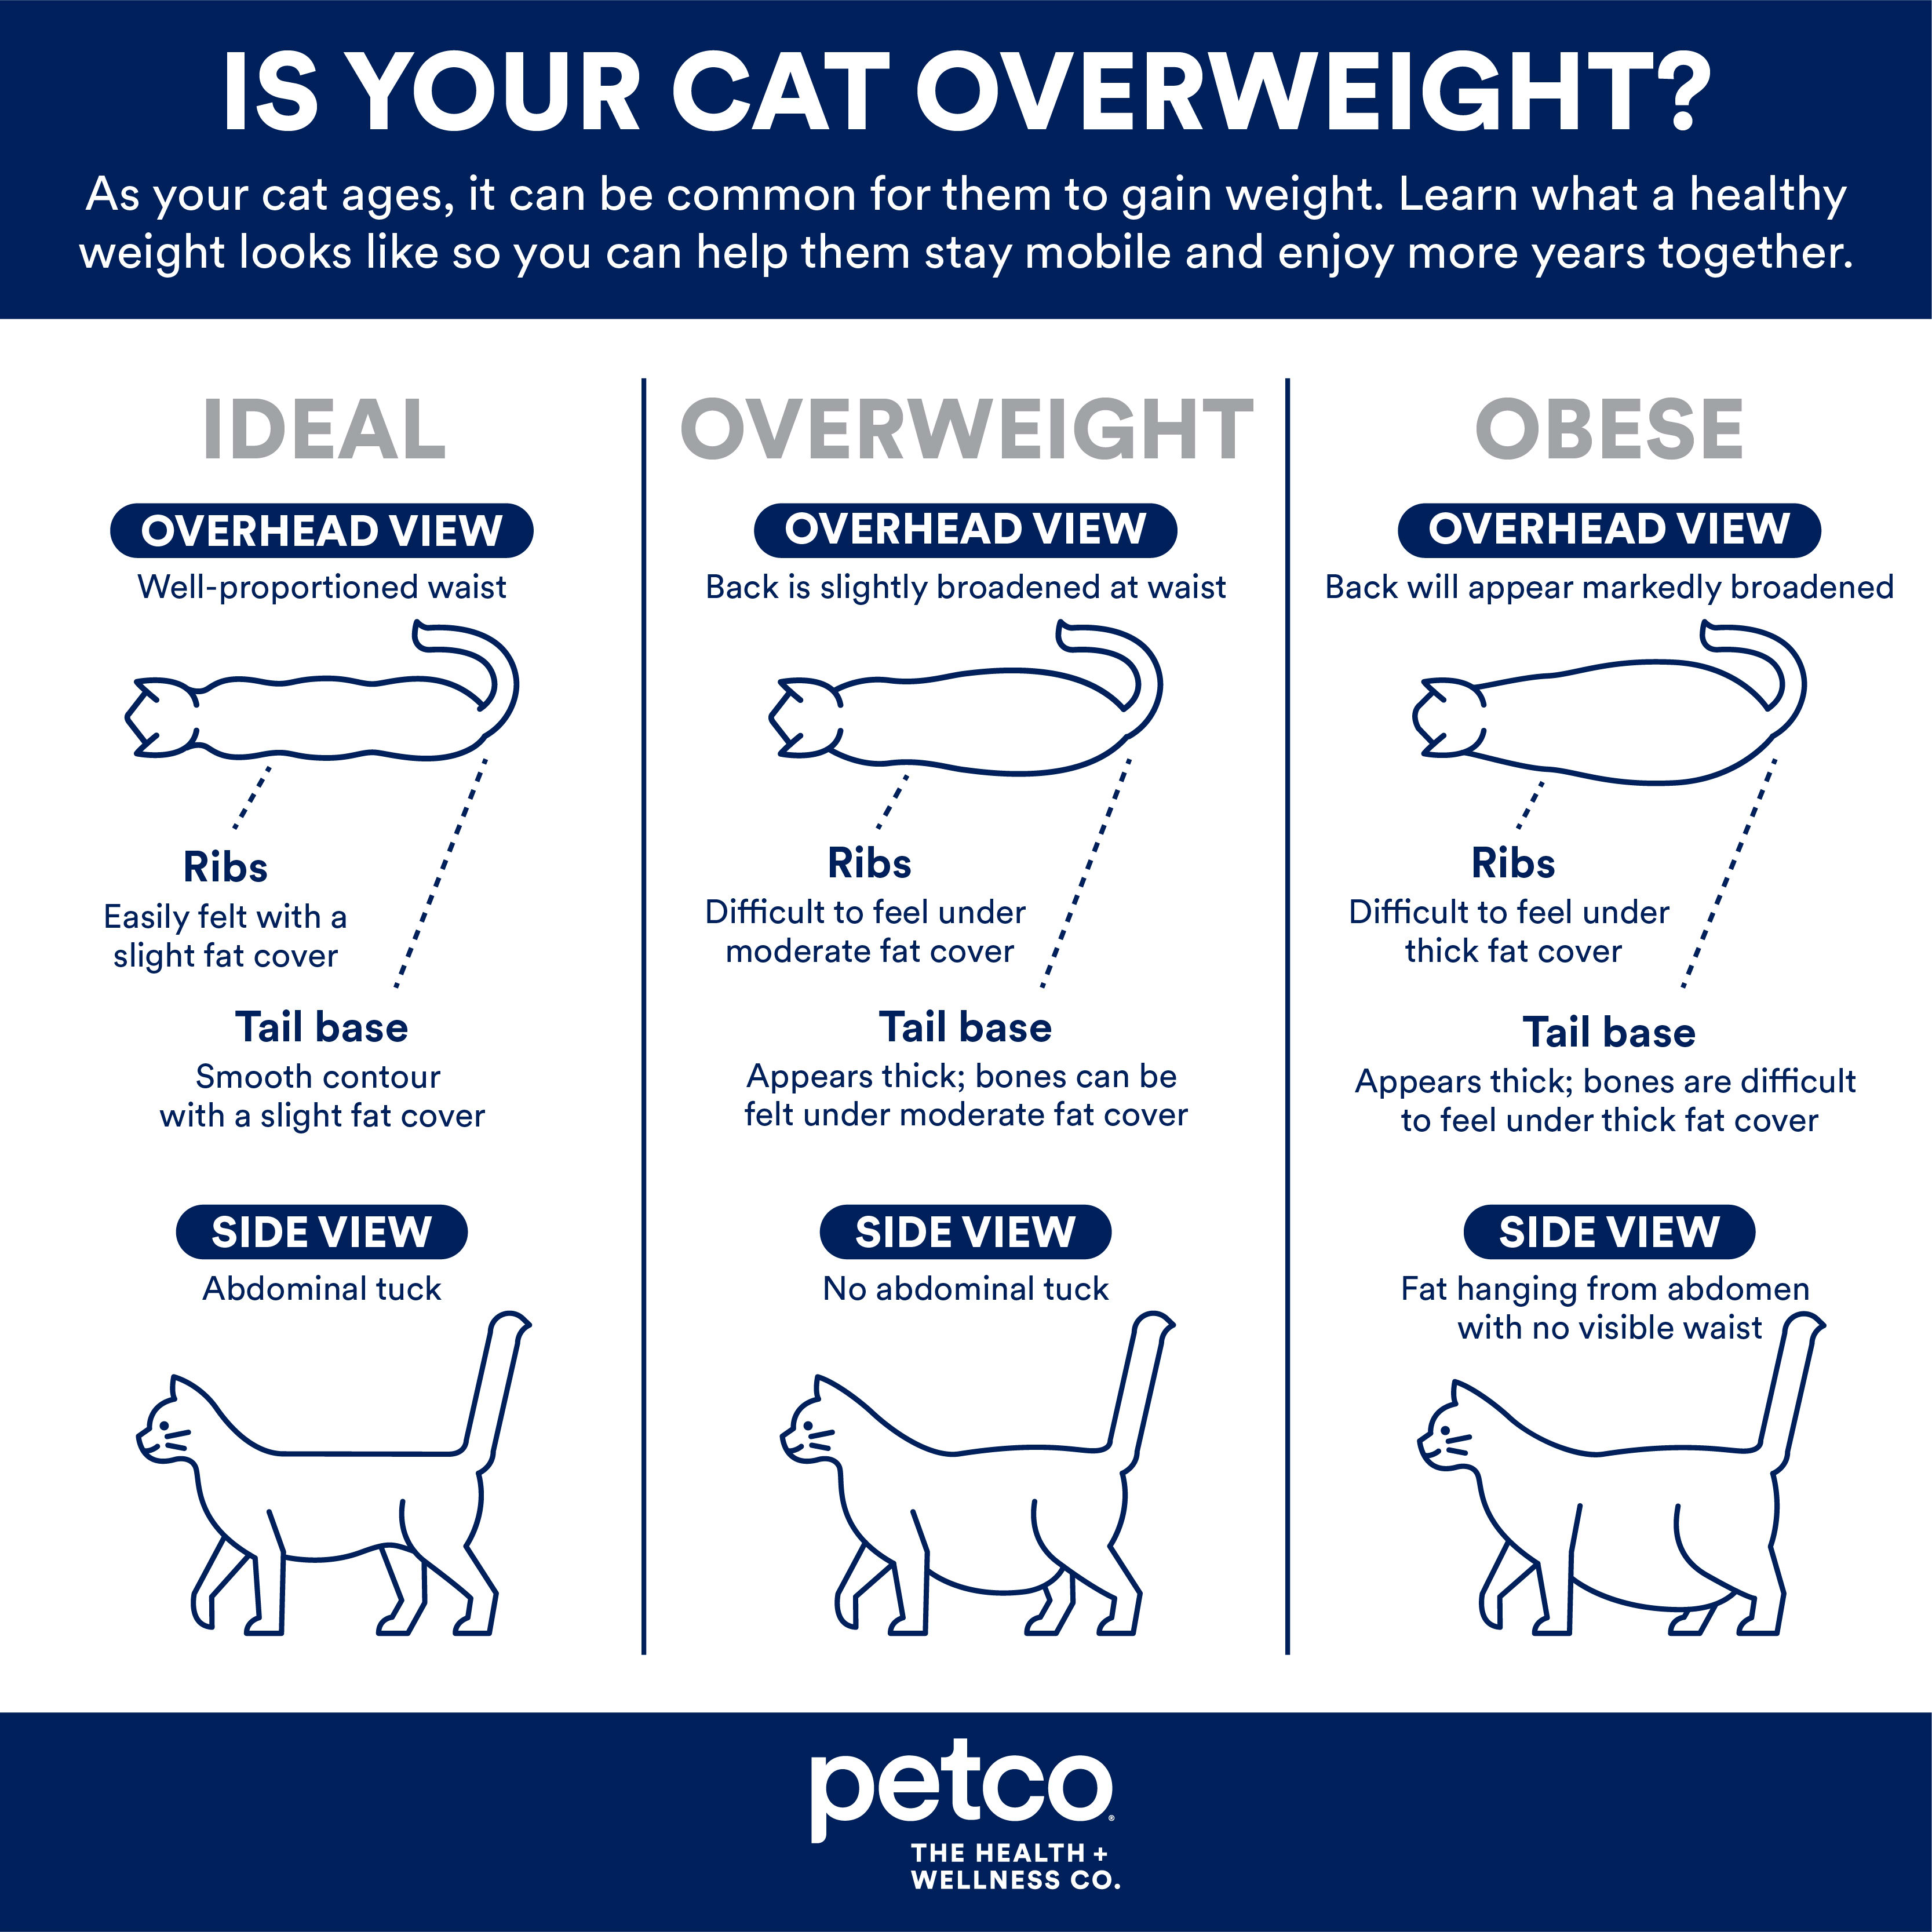 Why do older cats lose weight?